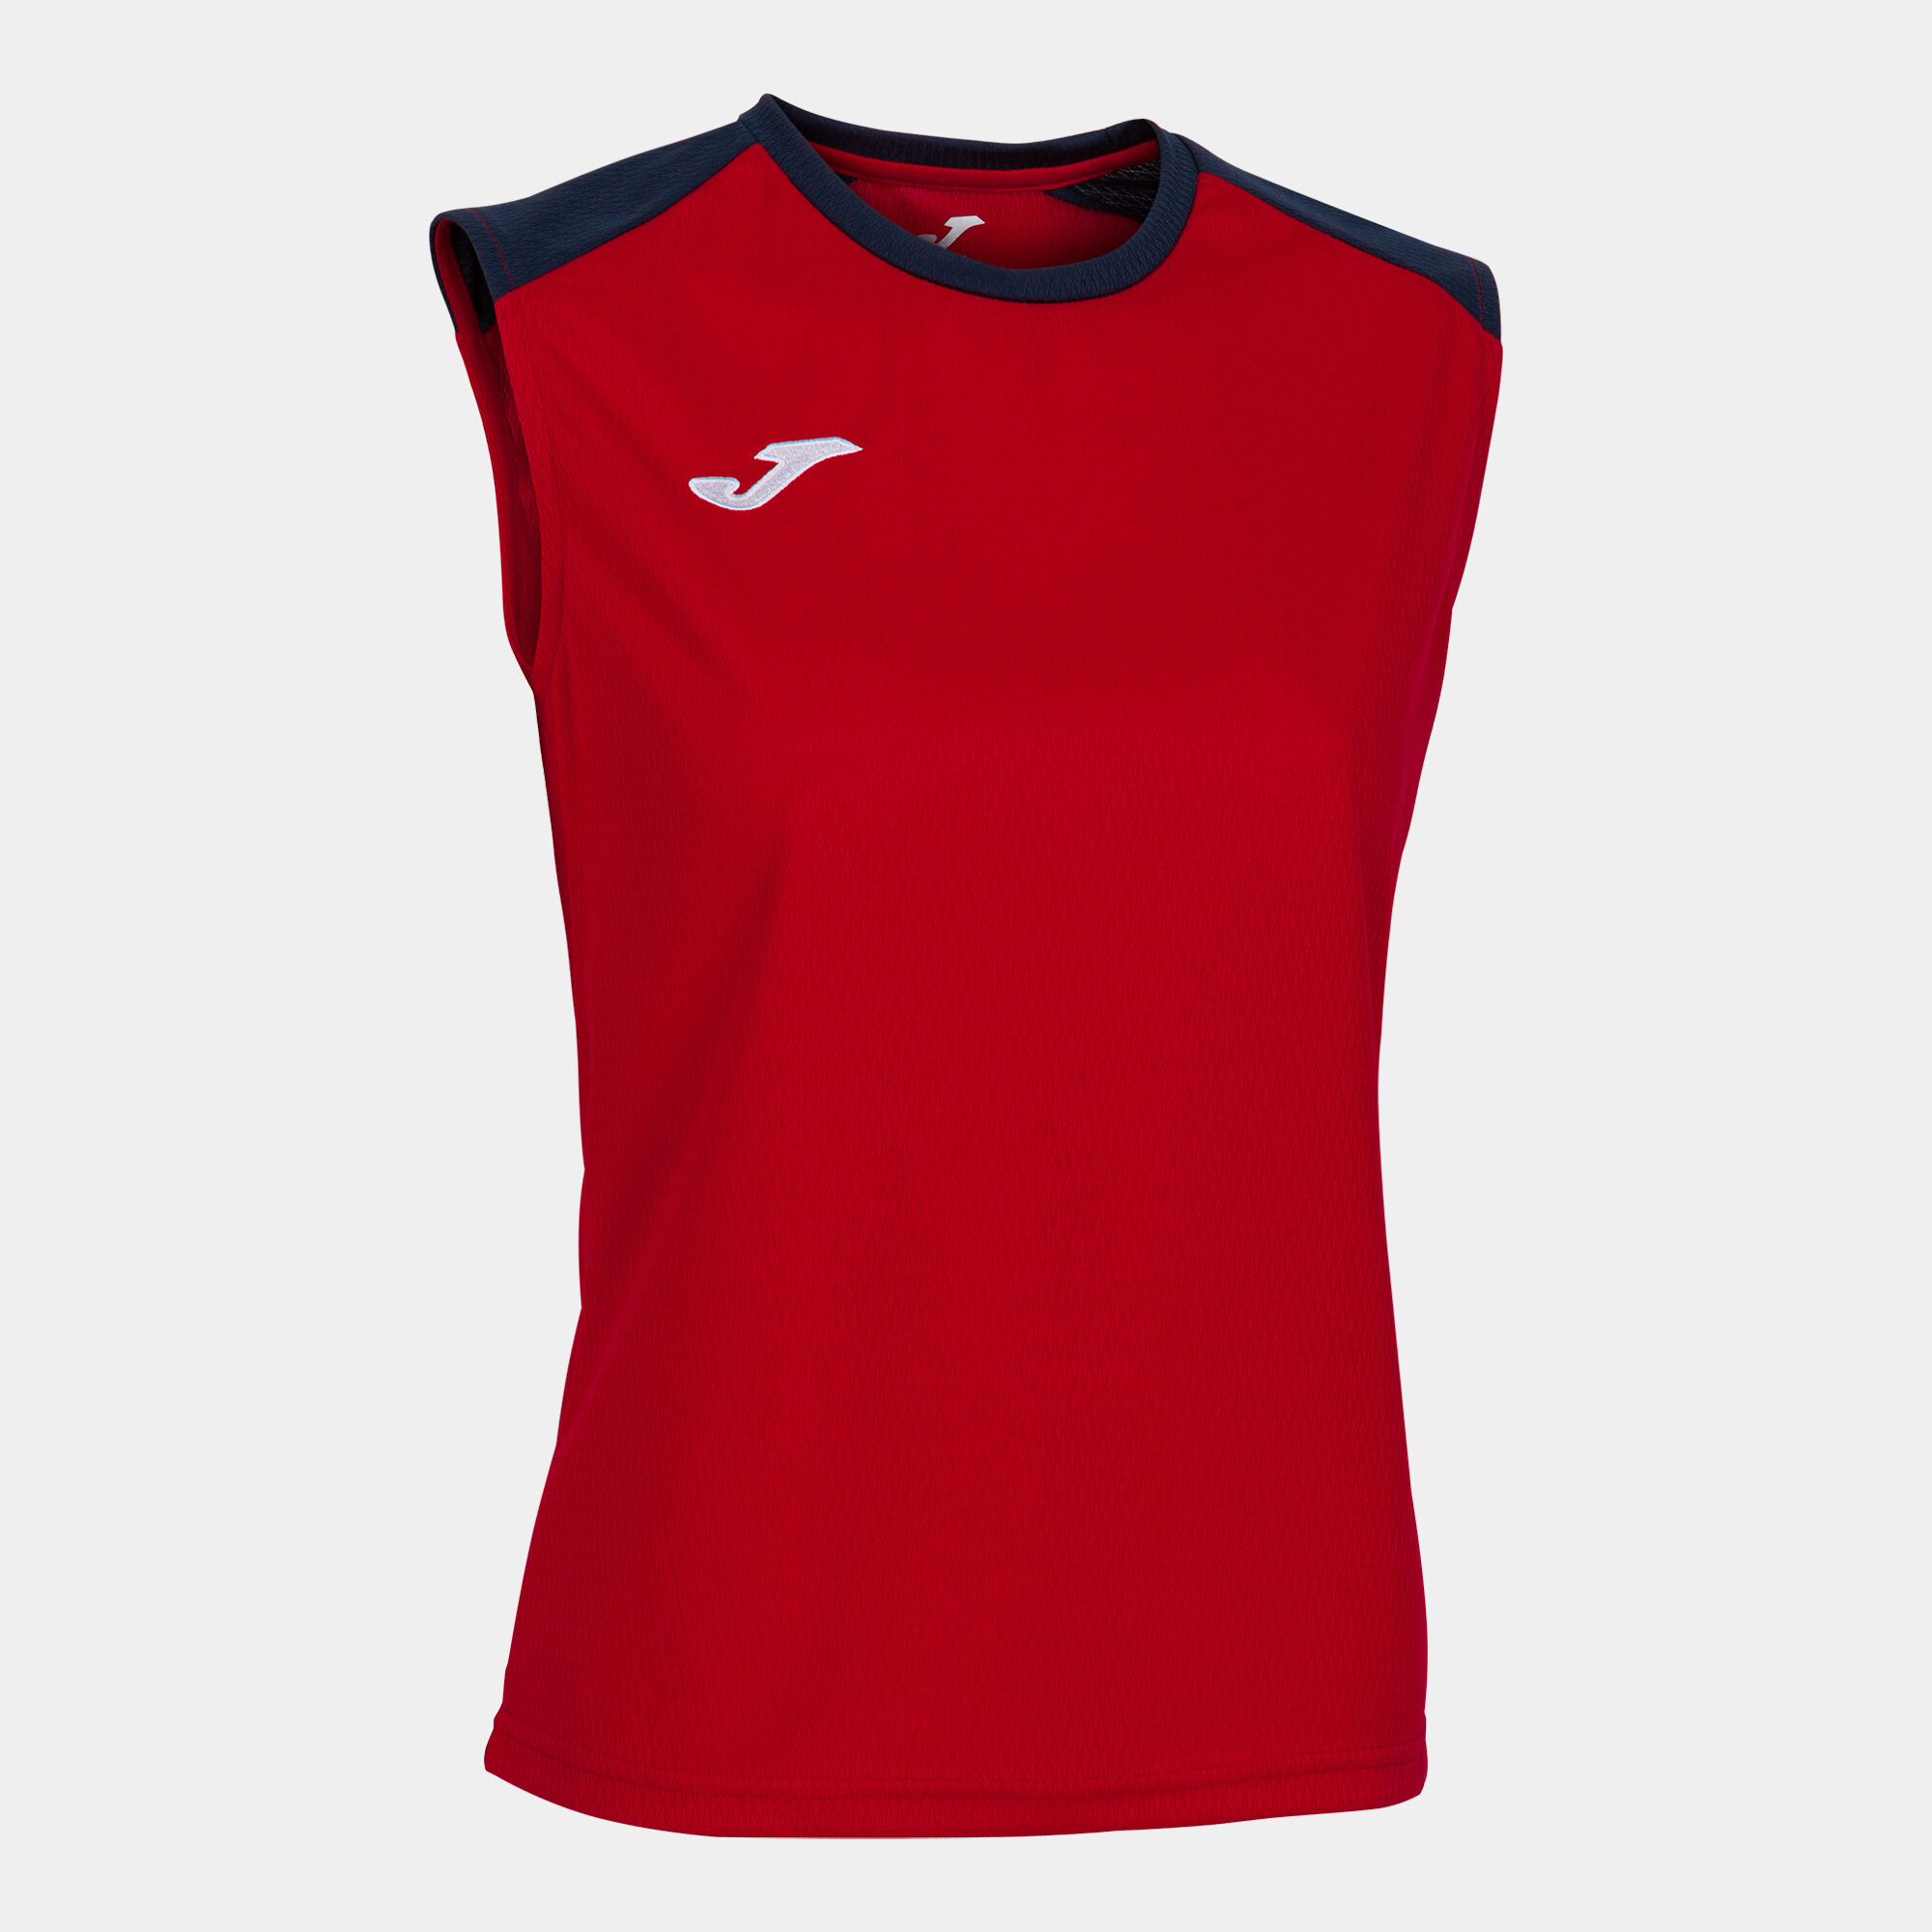 TANK TOP WOMAN ECO CHAMPIONSHIP RED NAVY BLUE